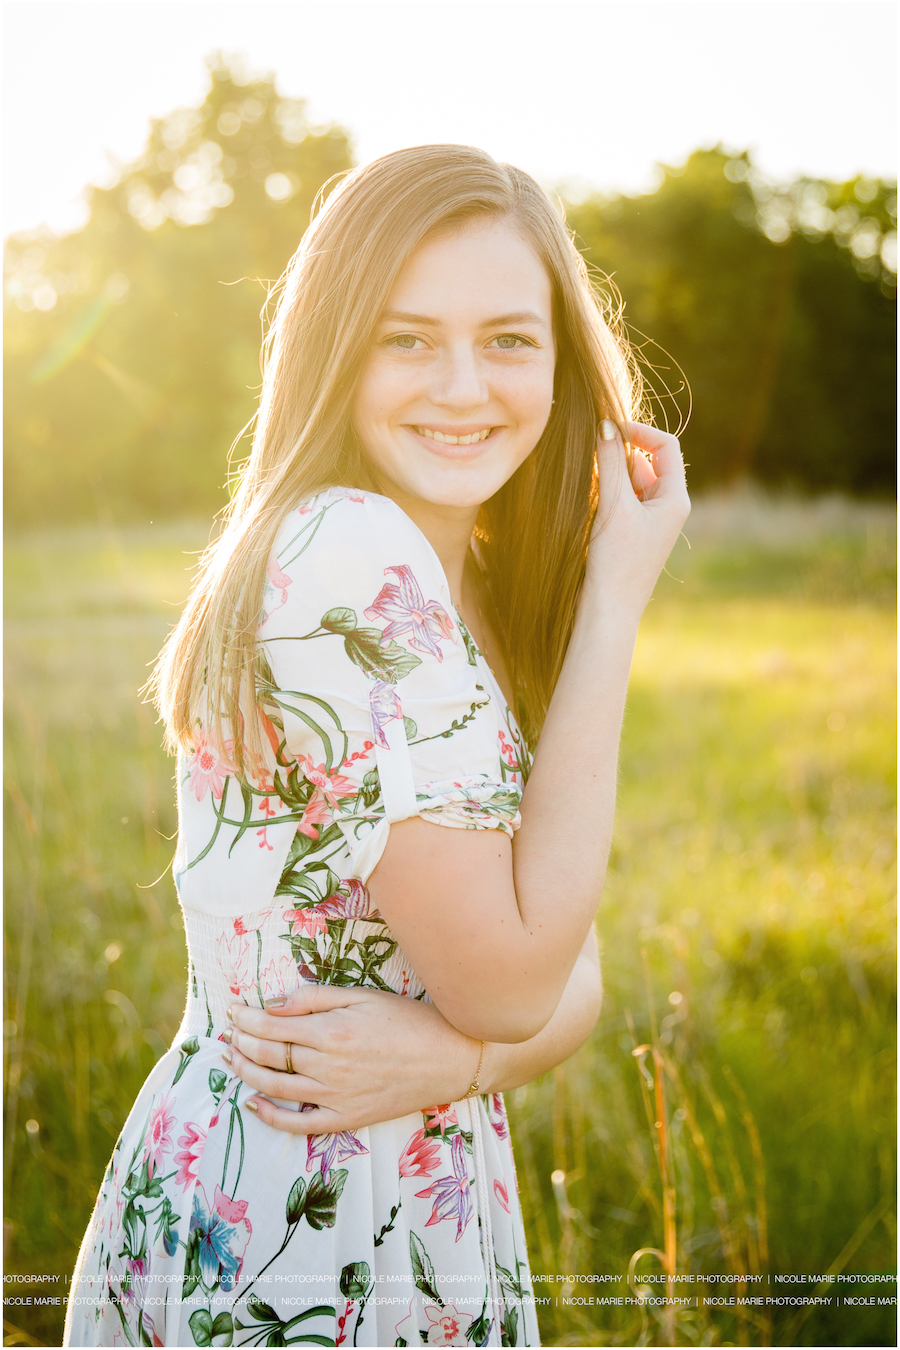 Ellie | Sioux Falls, SD Senior Photography & Videography